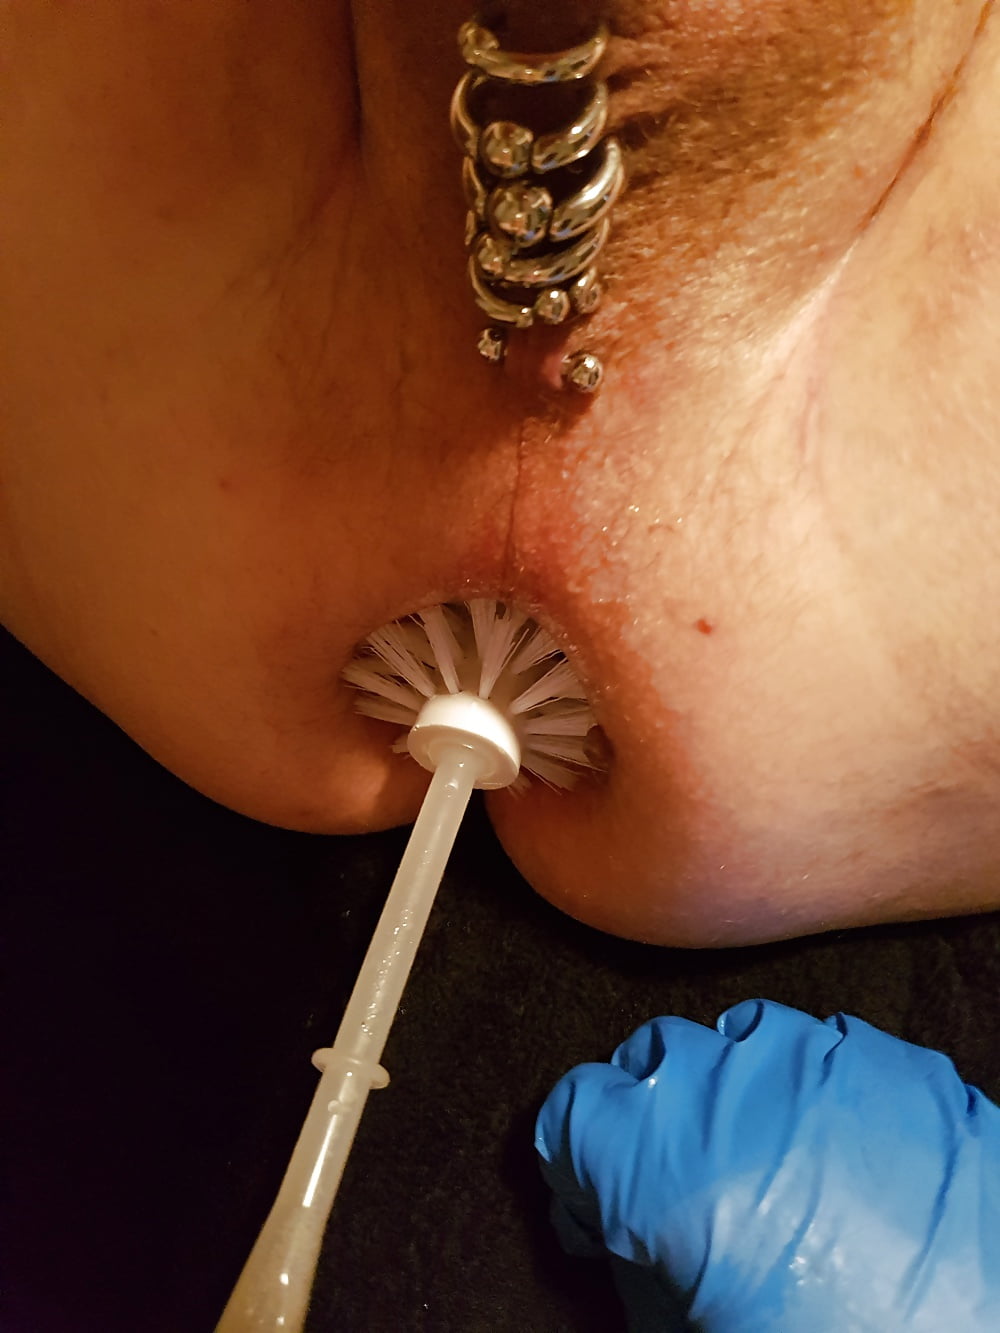 Anal with brush